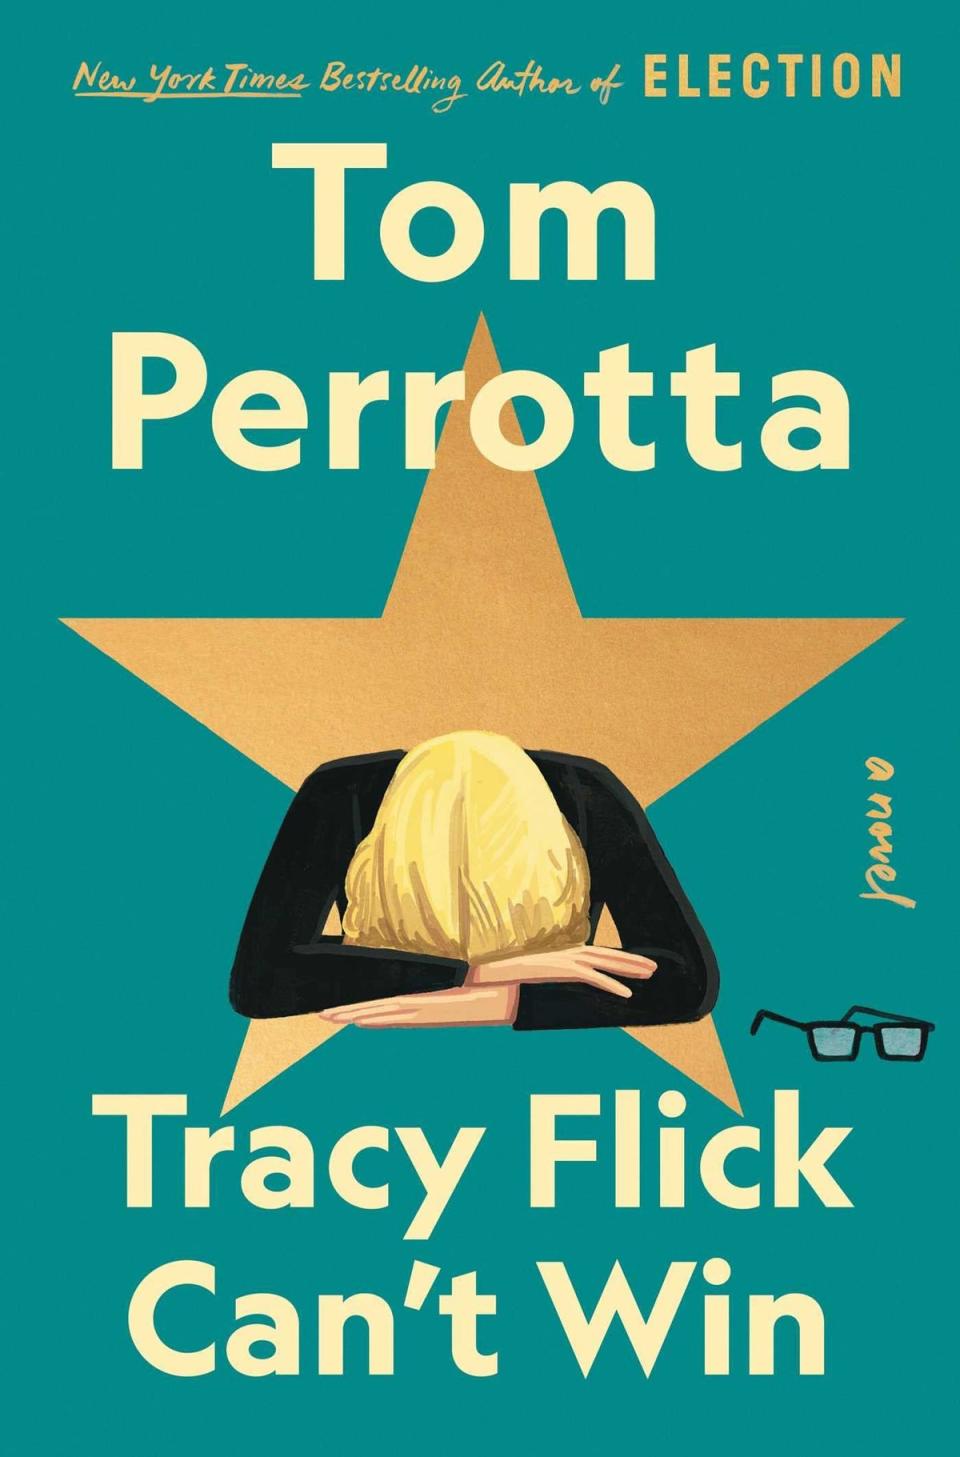 Tom Perrotta’s ‘Election’ sequel ‘Tracy Flick Can’t Win’ (Scribner)